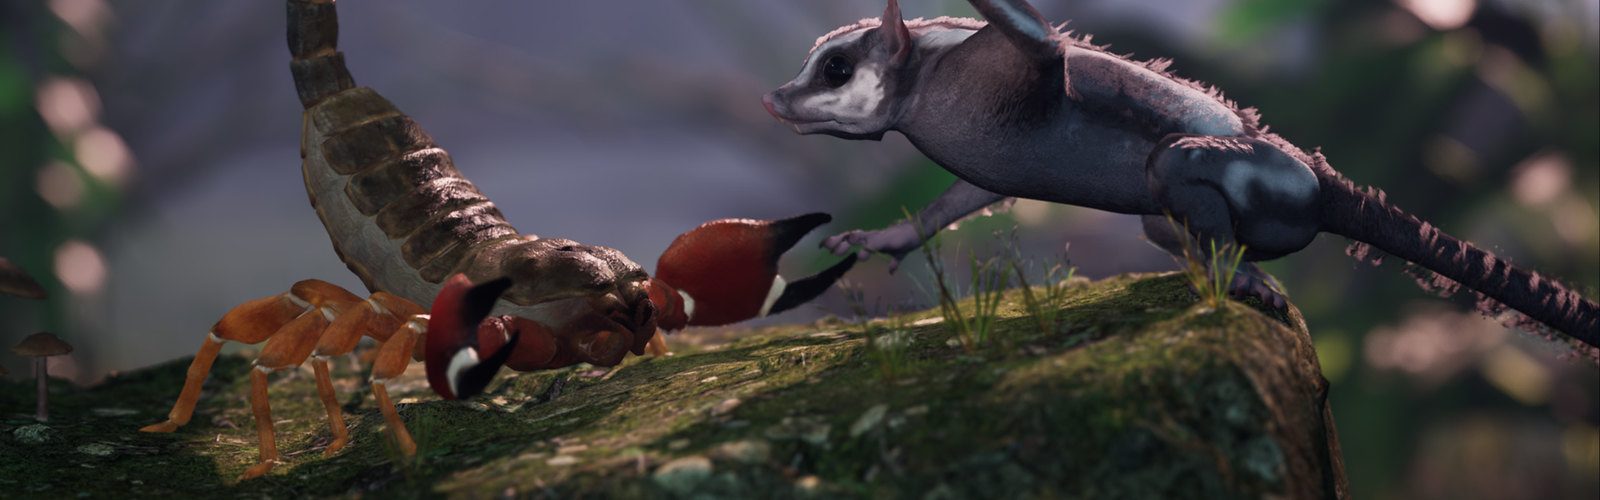 ps4 games about animals